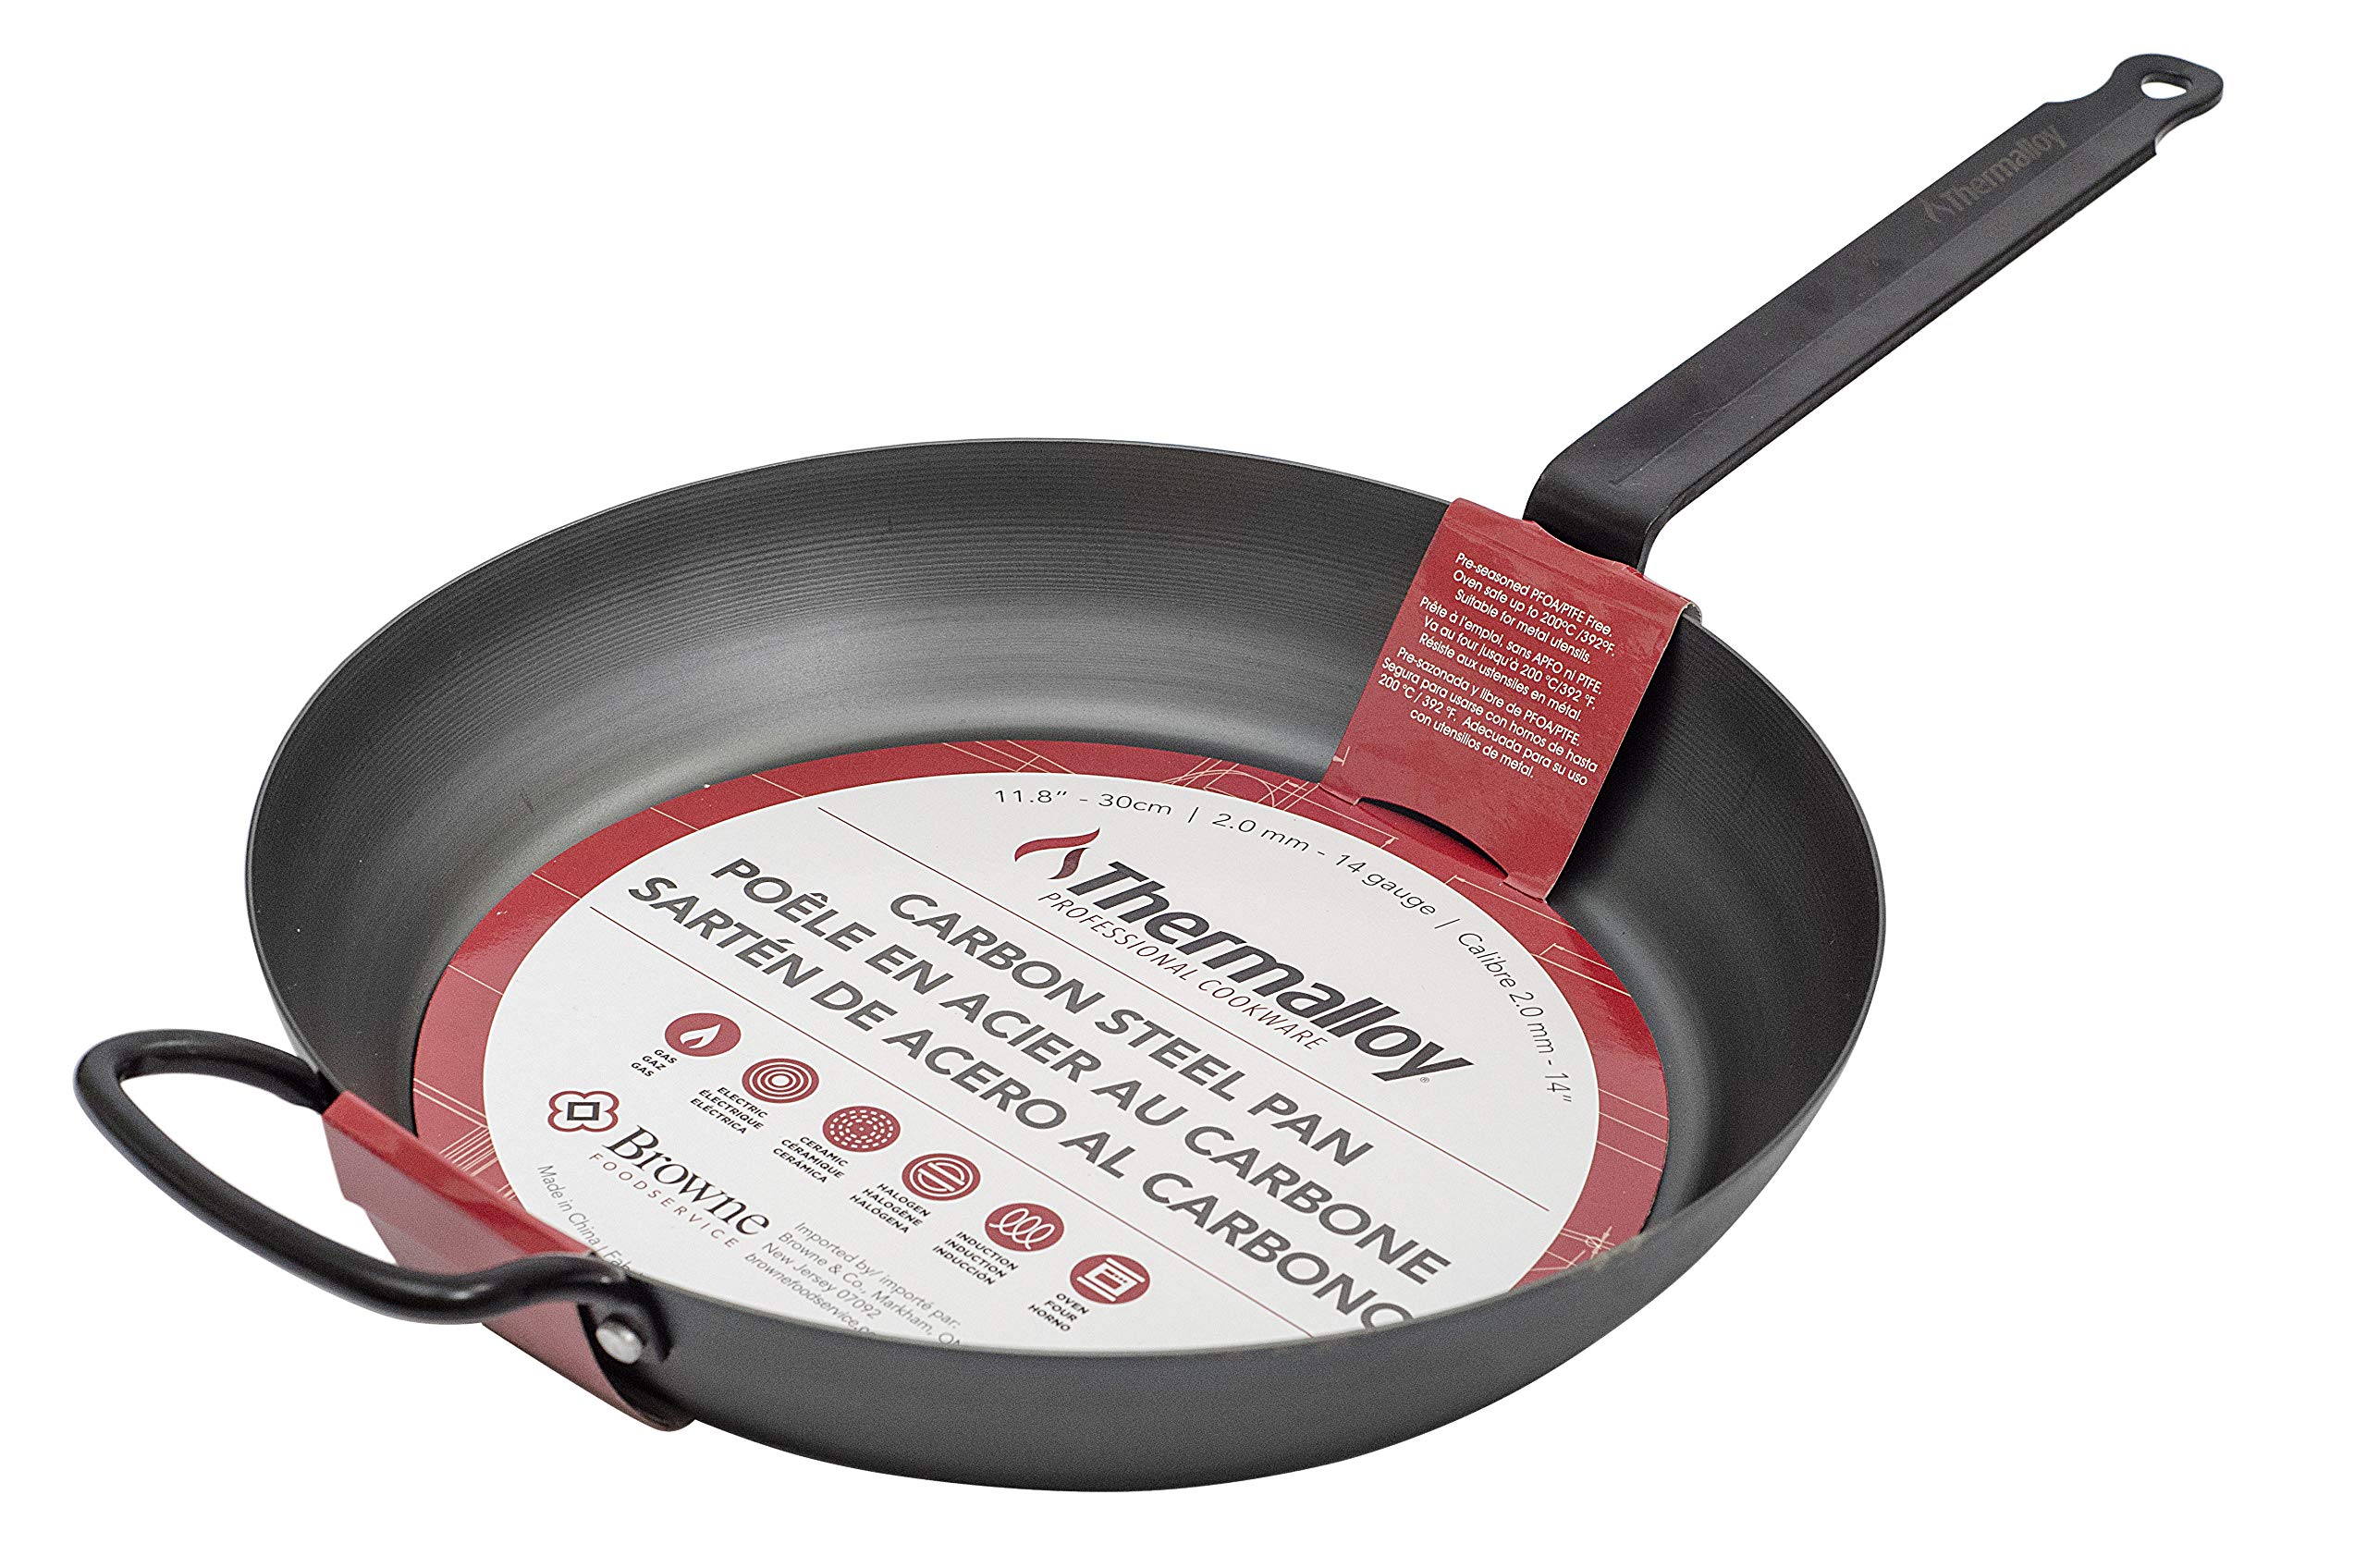 Browne Foodservice THERMALLOY 11.8 Inch Black Carbon Steel Fry Pan